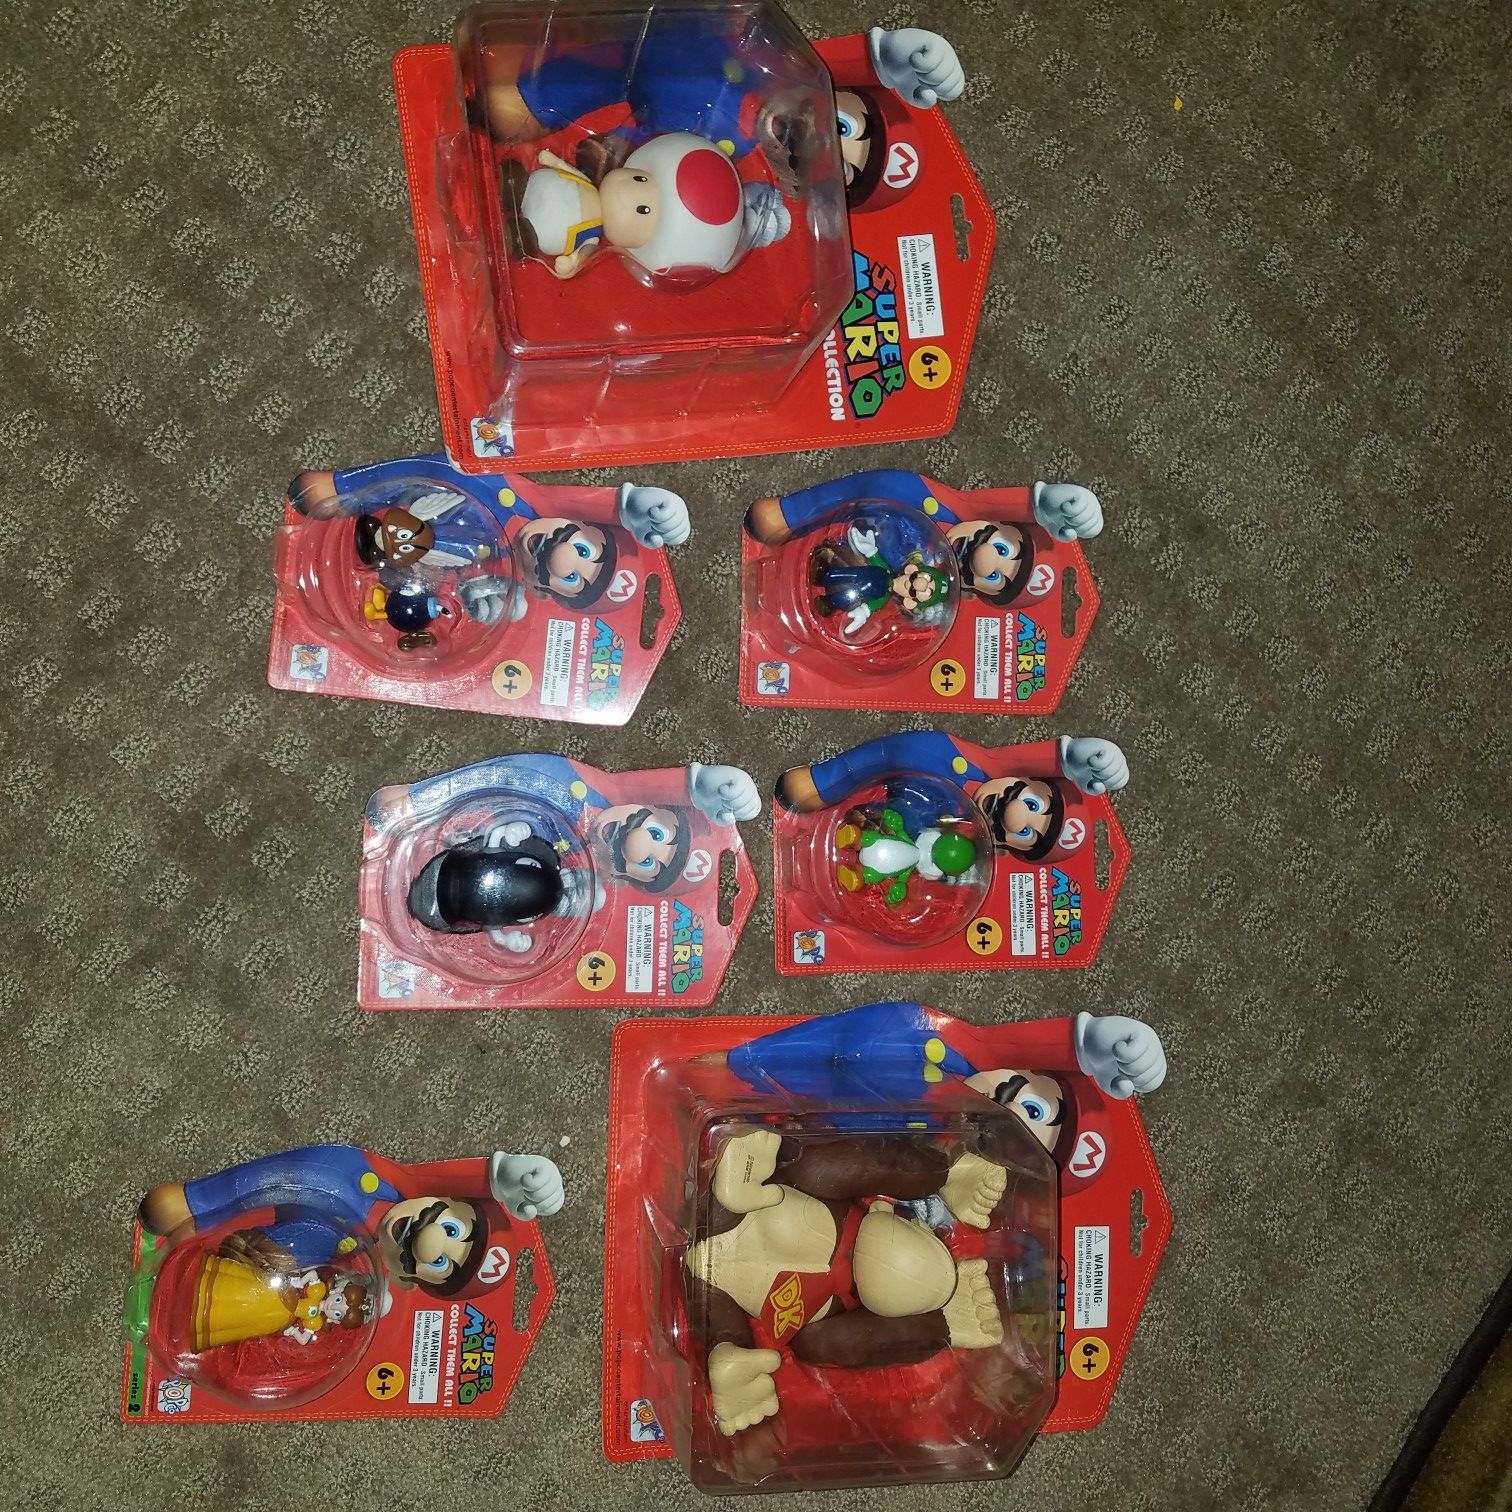 Mario toy collection 10 years old